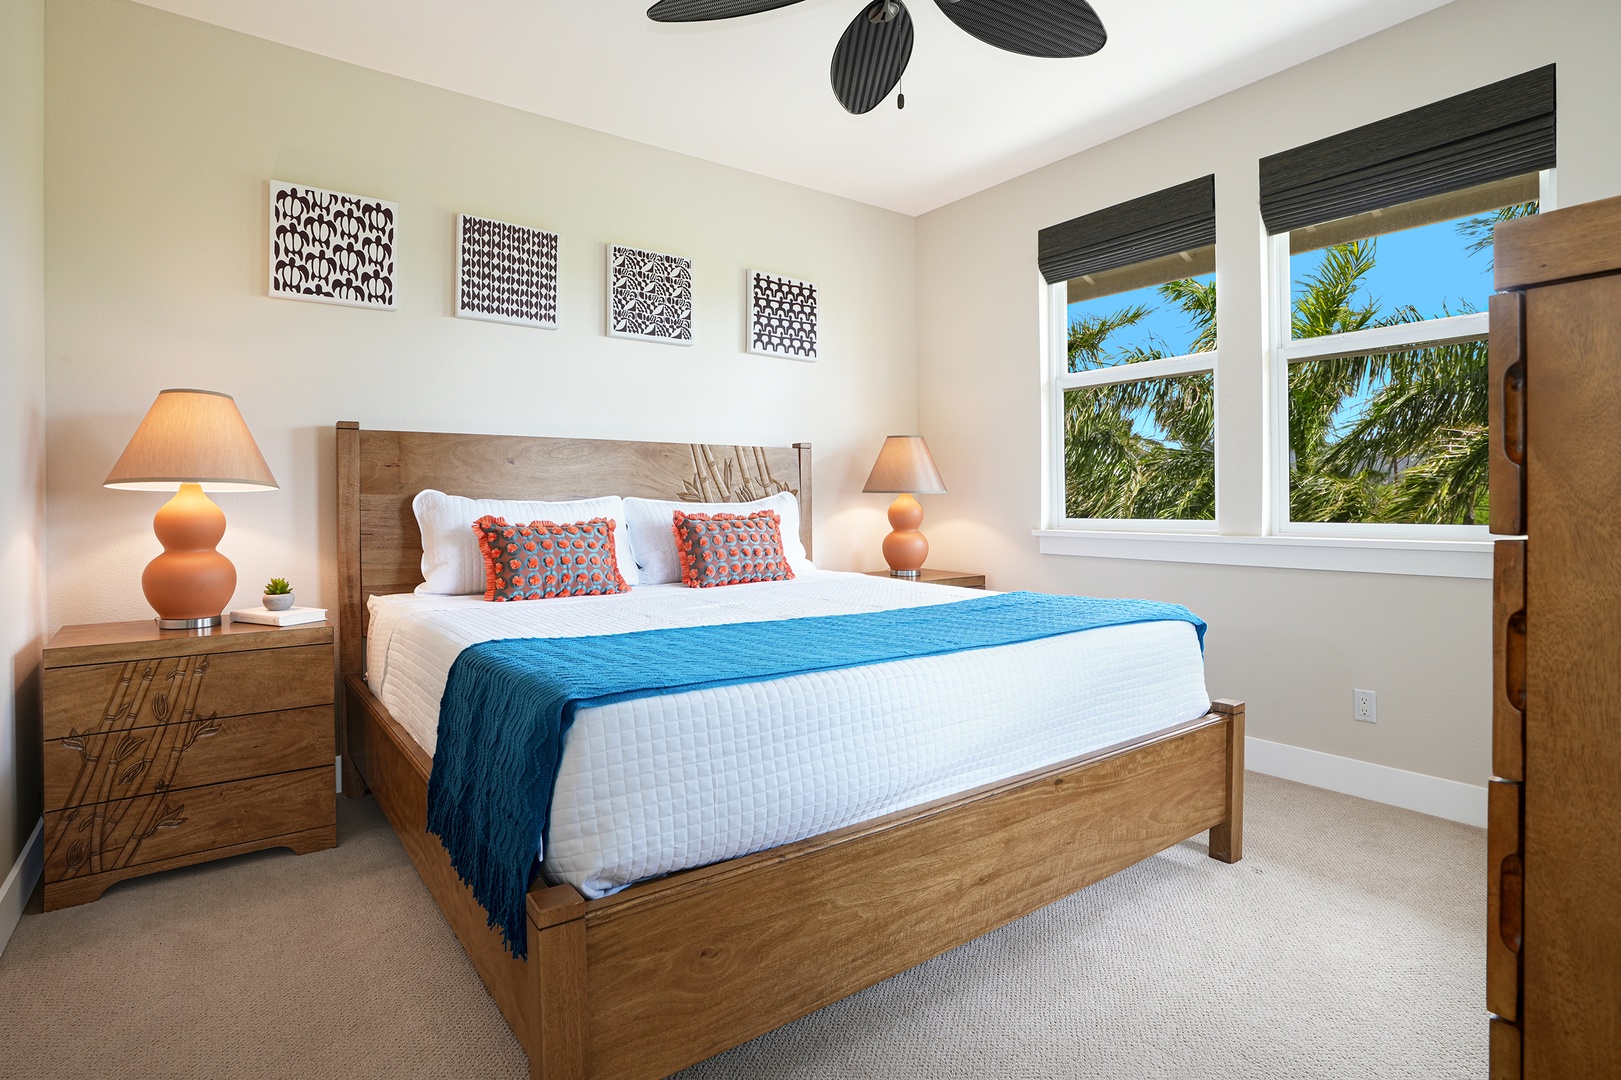 Koloa Vacation Rentals, Pili Mai 15G - The living room, primary bedroom, and second king bedroom come equipped with large flat-screen smart televisions. High-speed internet